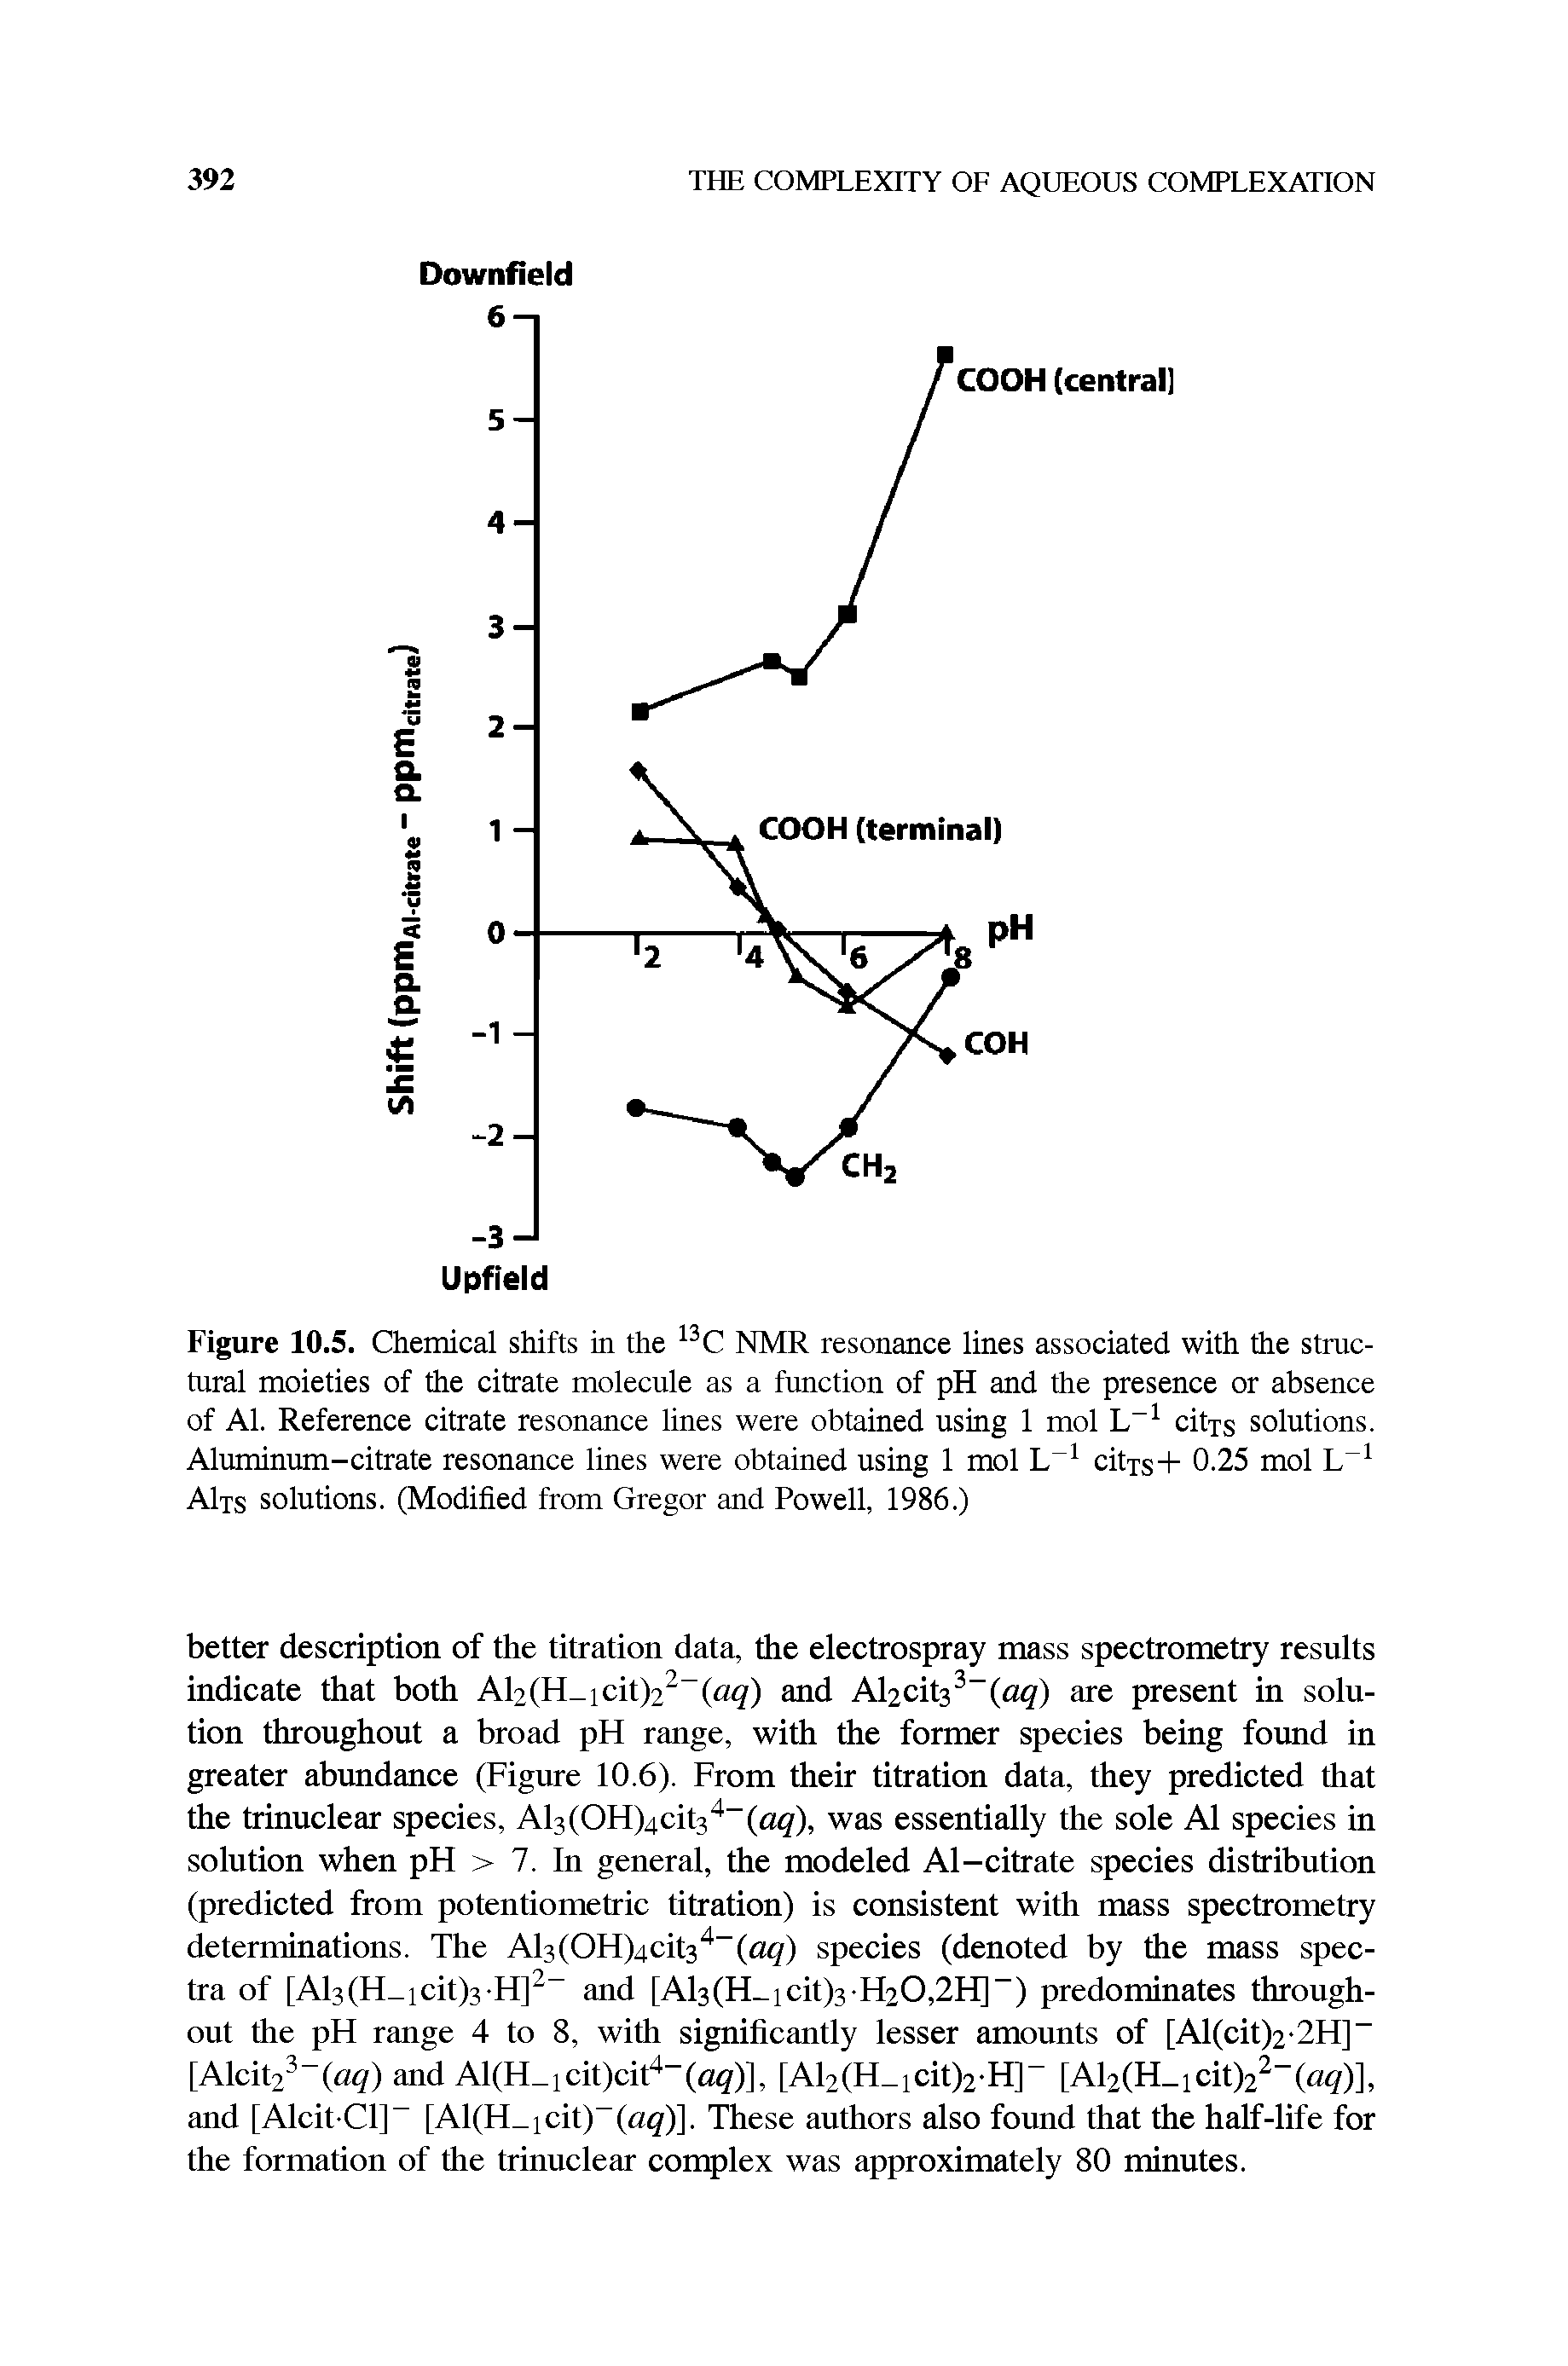 Figure 10.5. Chemical shifts in the NMR resonance lines associated with the structural moieties of the citrate molecule as a function of pH and the presence or absence of Al. Reference citrate resonance lines were obtained using 1 mol citrs solutions. Aluminum-citrate resonance lines were obtained using 1 mol L citTs+ 0.25 mol L AIts solutions. (Modified from Gregor and Powell, 1986.)...